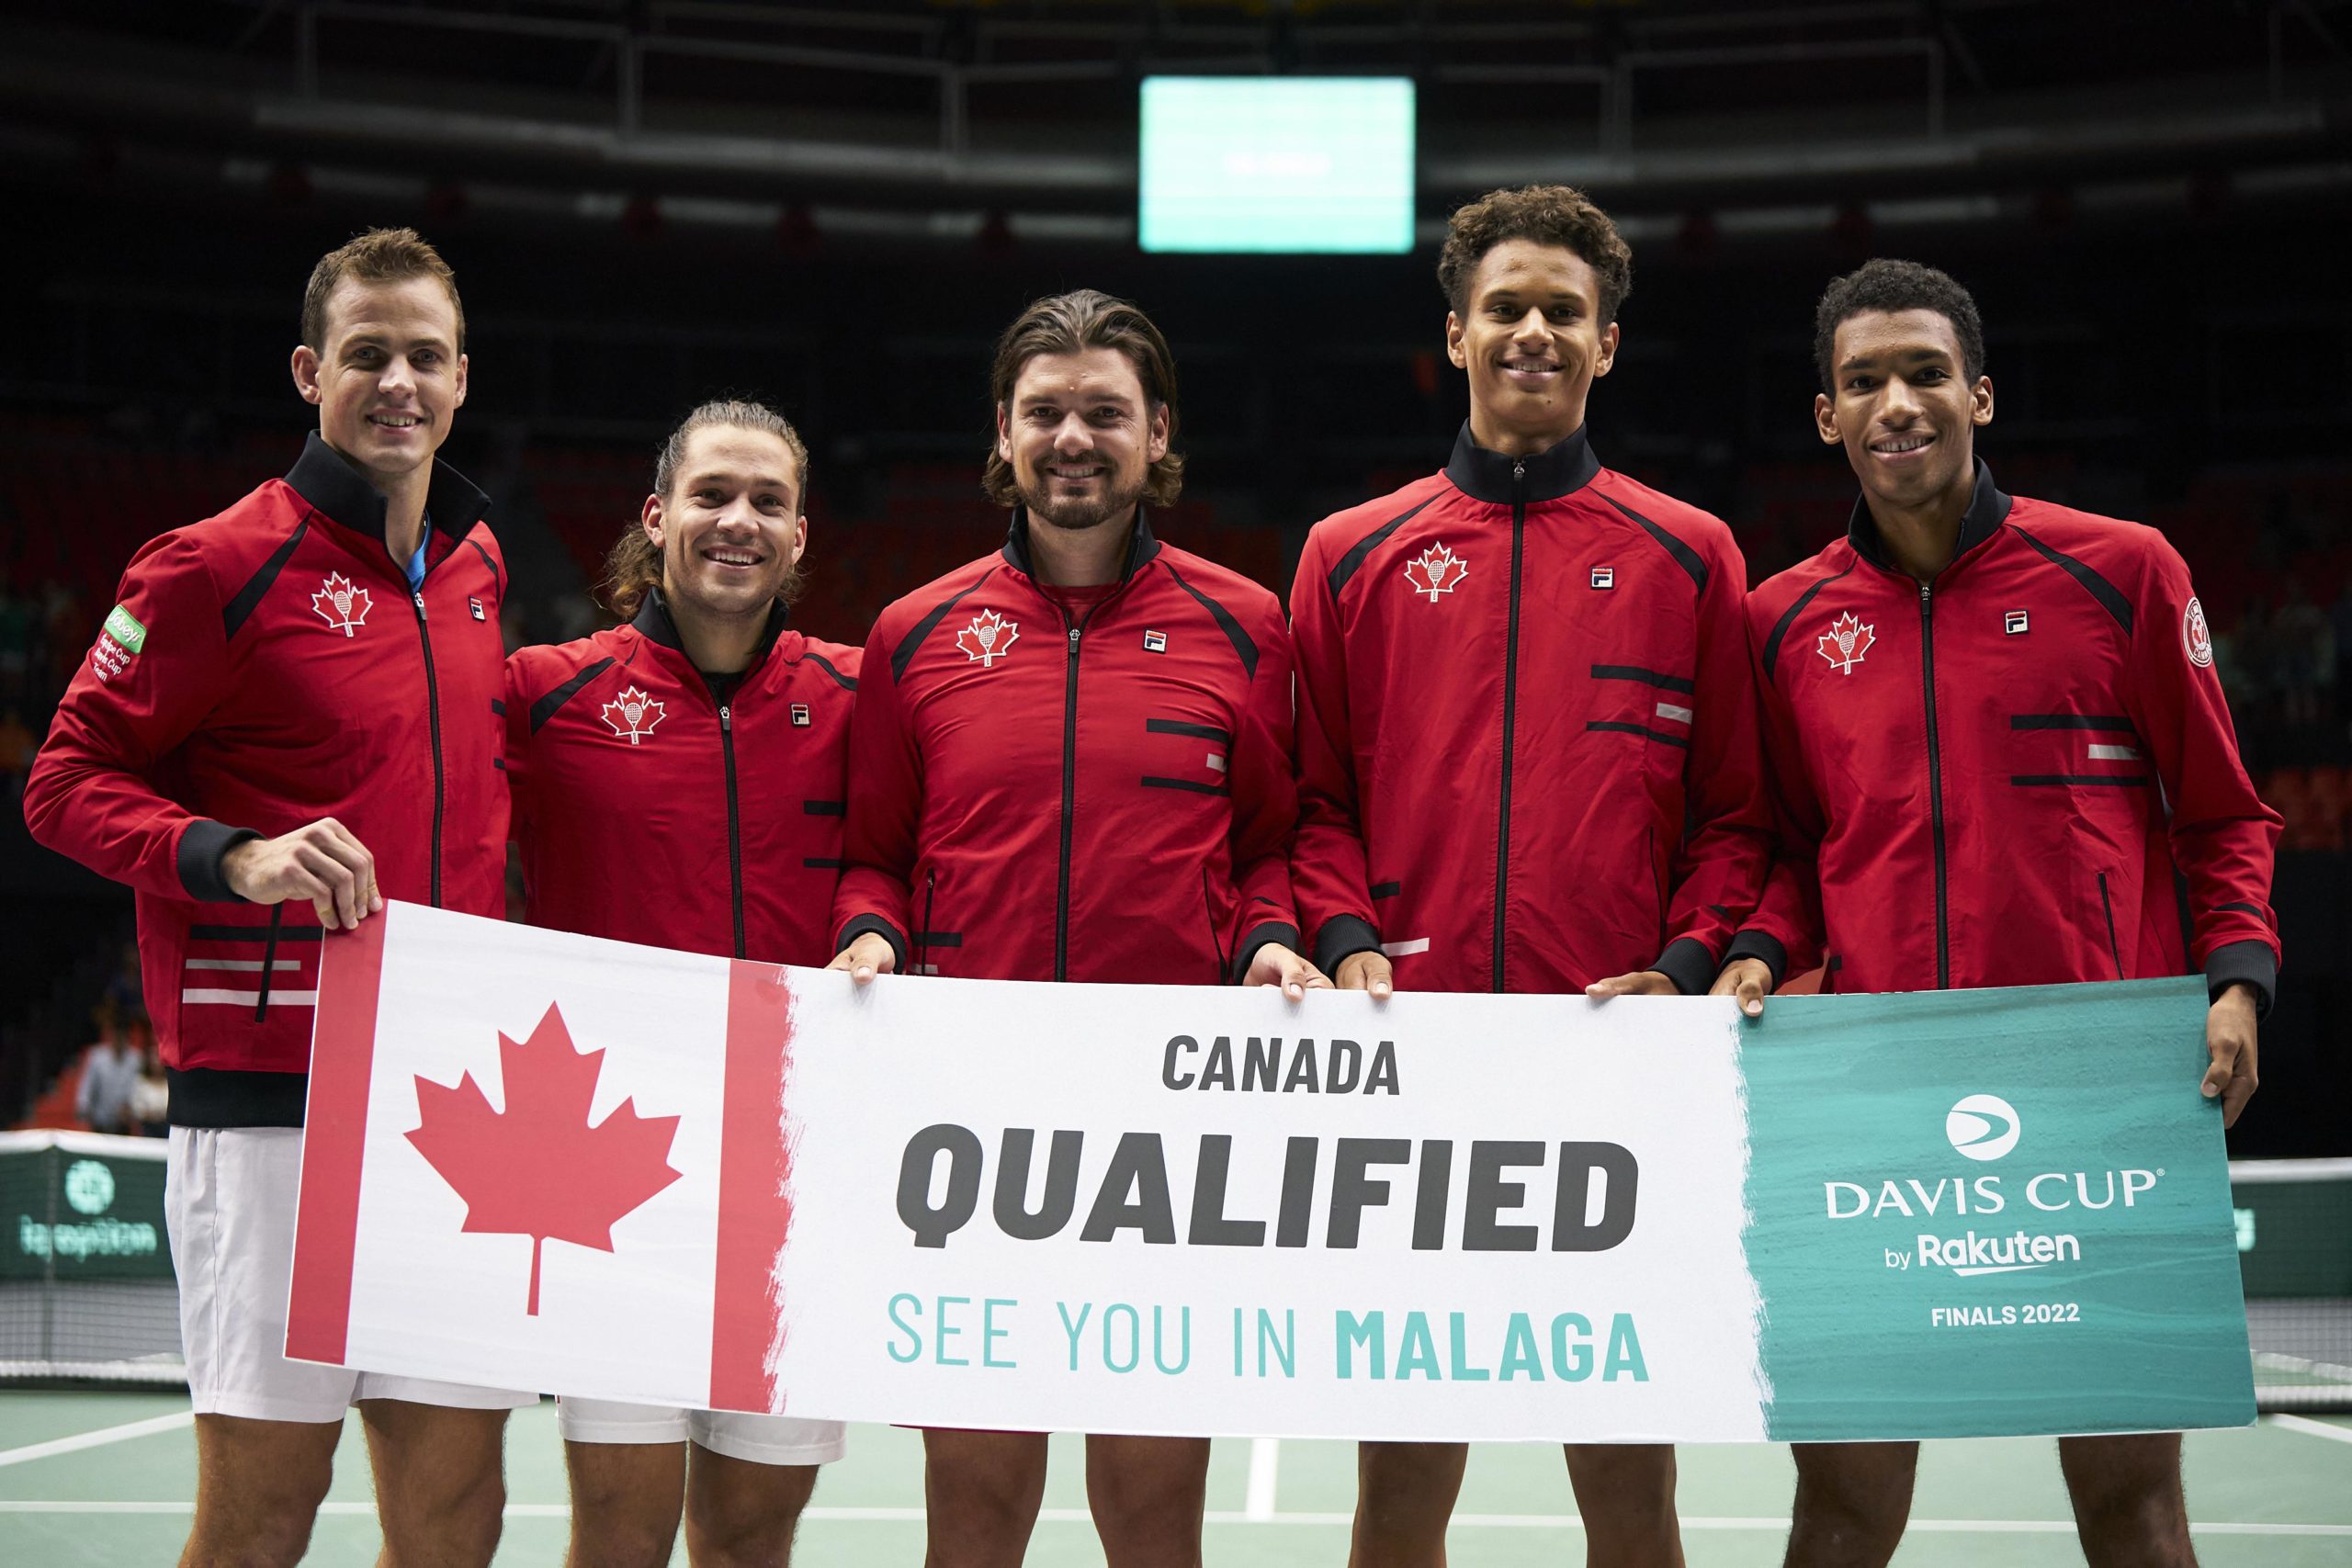 Vasek Pospisil, Alexis Galarneau, Frank Dancevic, Gabriel Diallo and Felix Auger-Aliassime hold up a sign that says "Qualified, See You in Malaga"